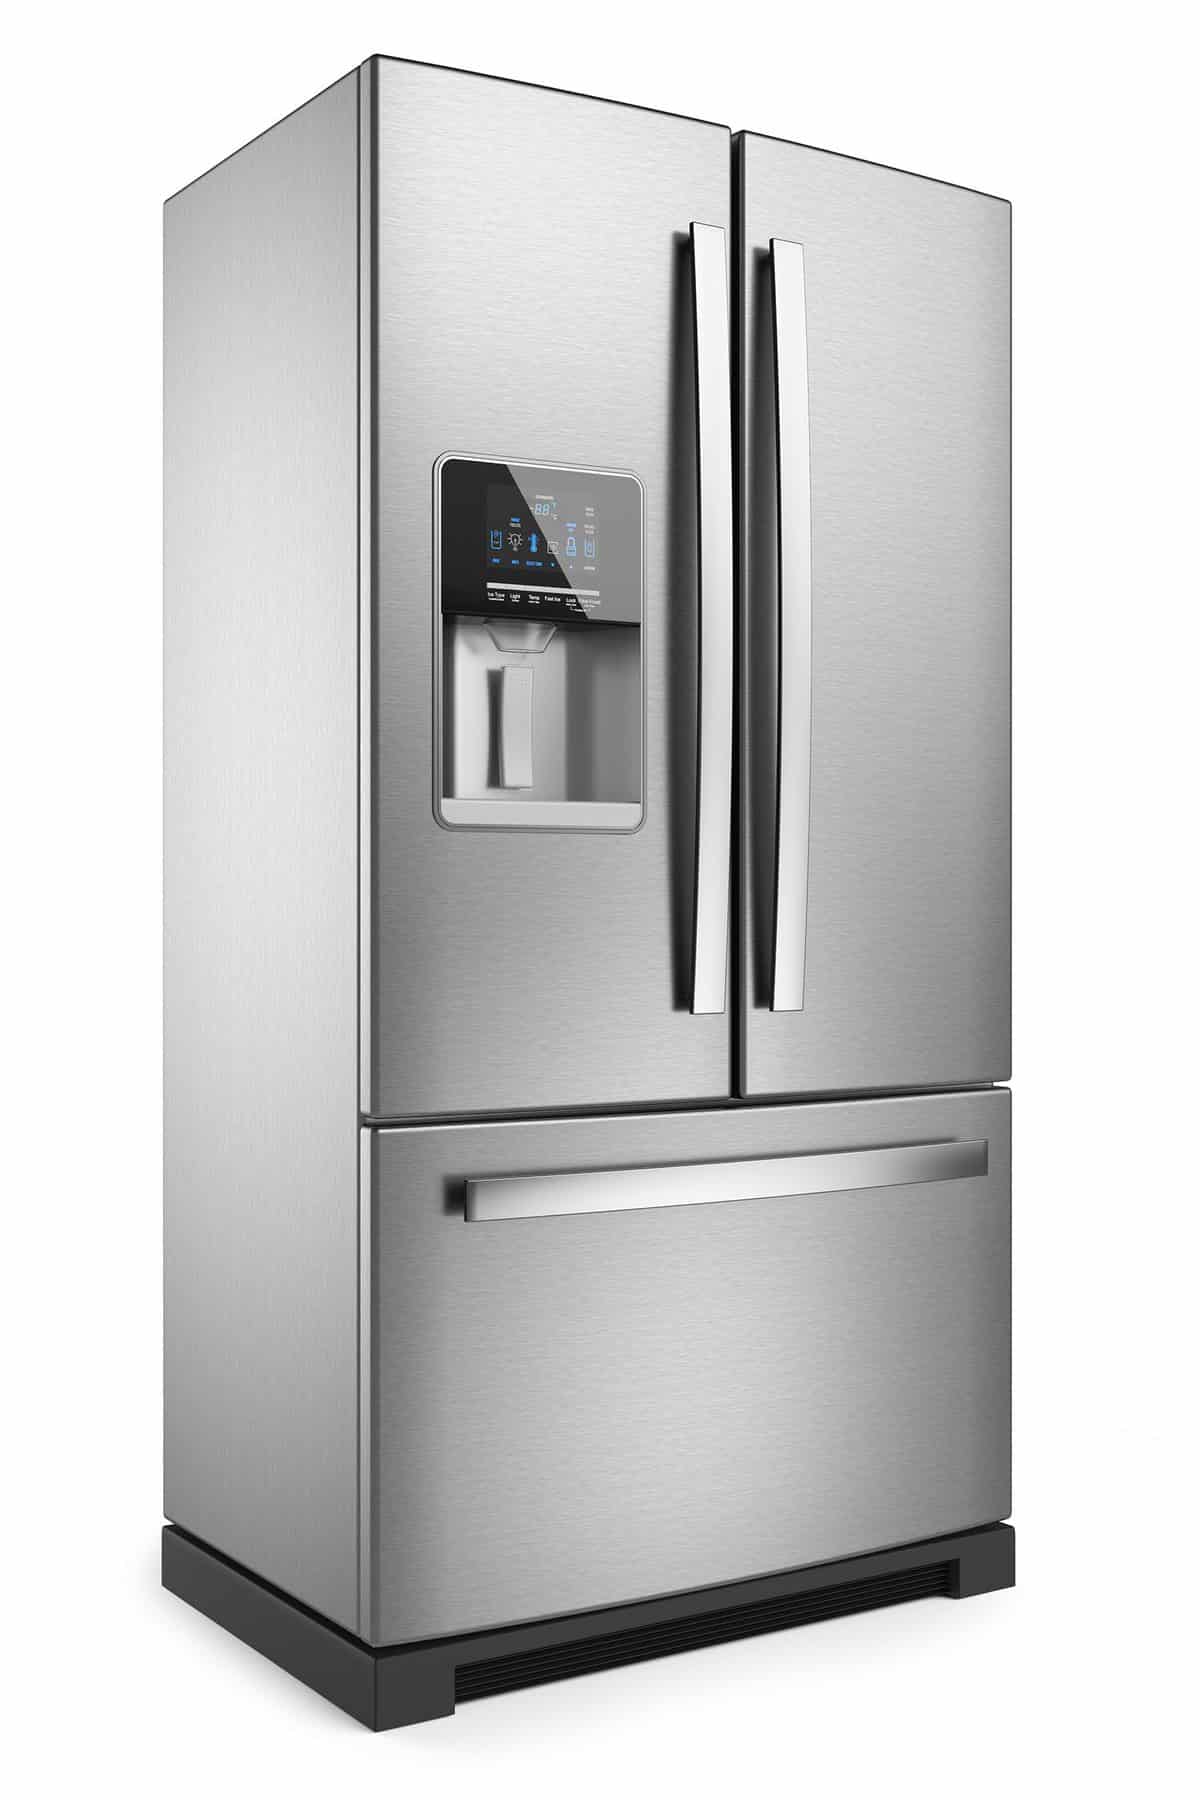 Silver home fridge isolated on white background